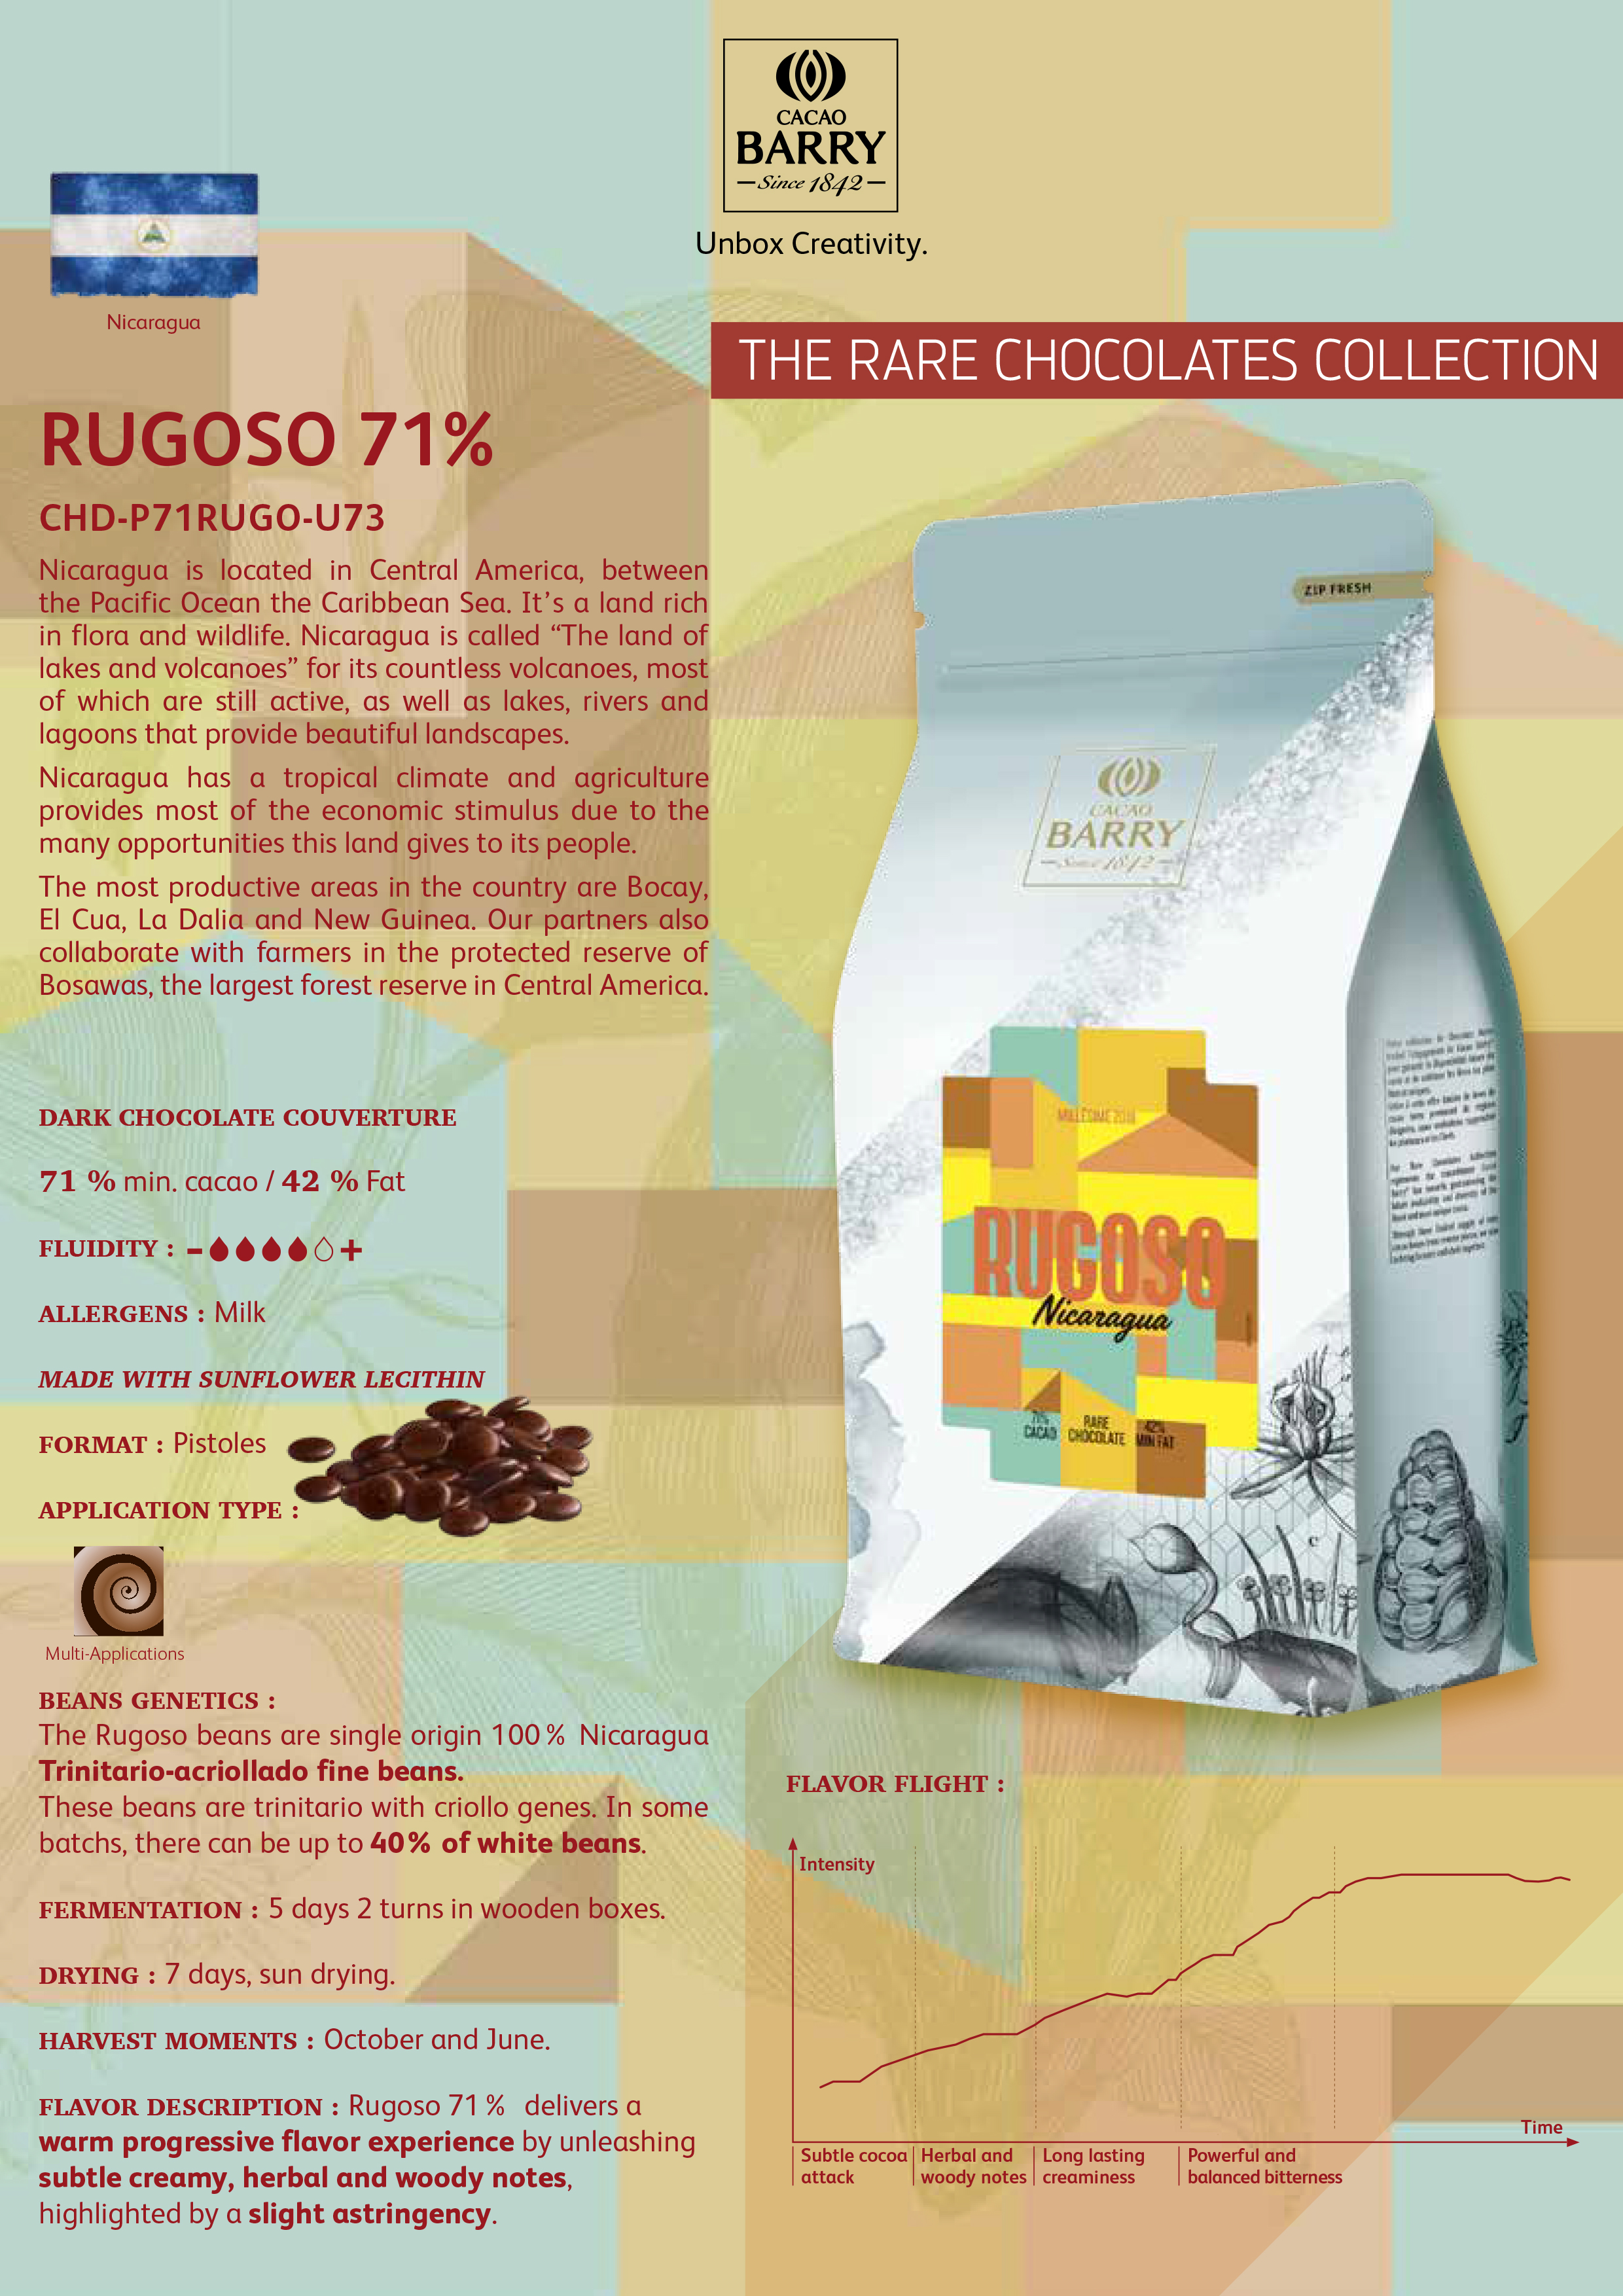 Cacao Barry ReRe Rugoso 71%